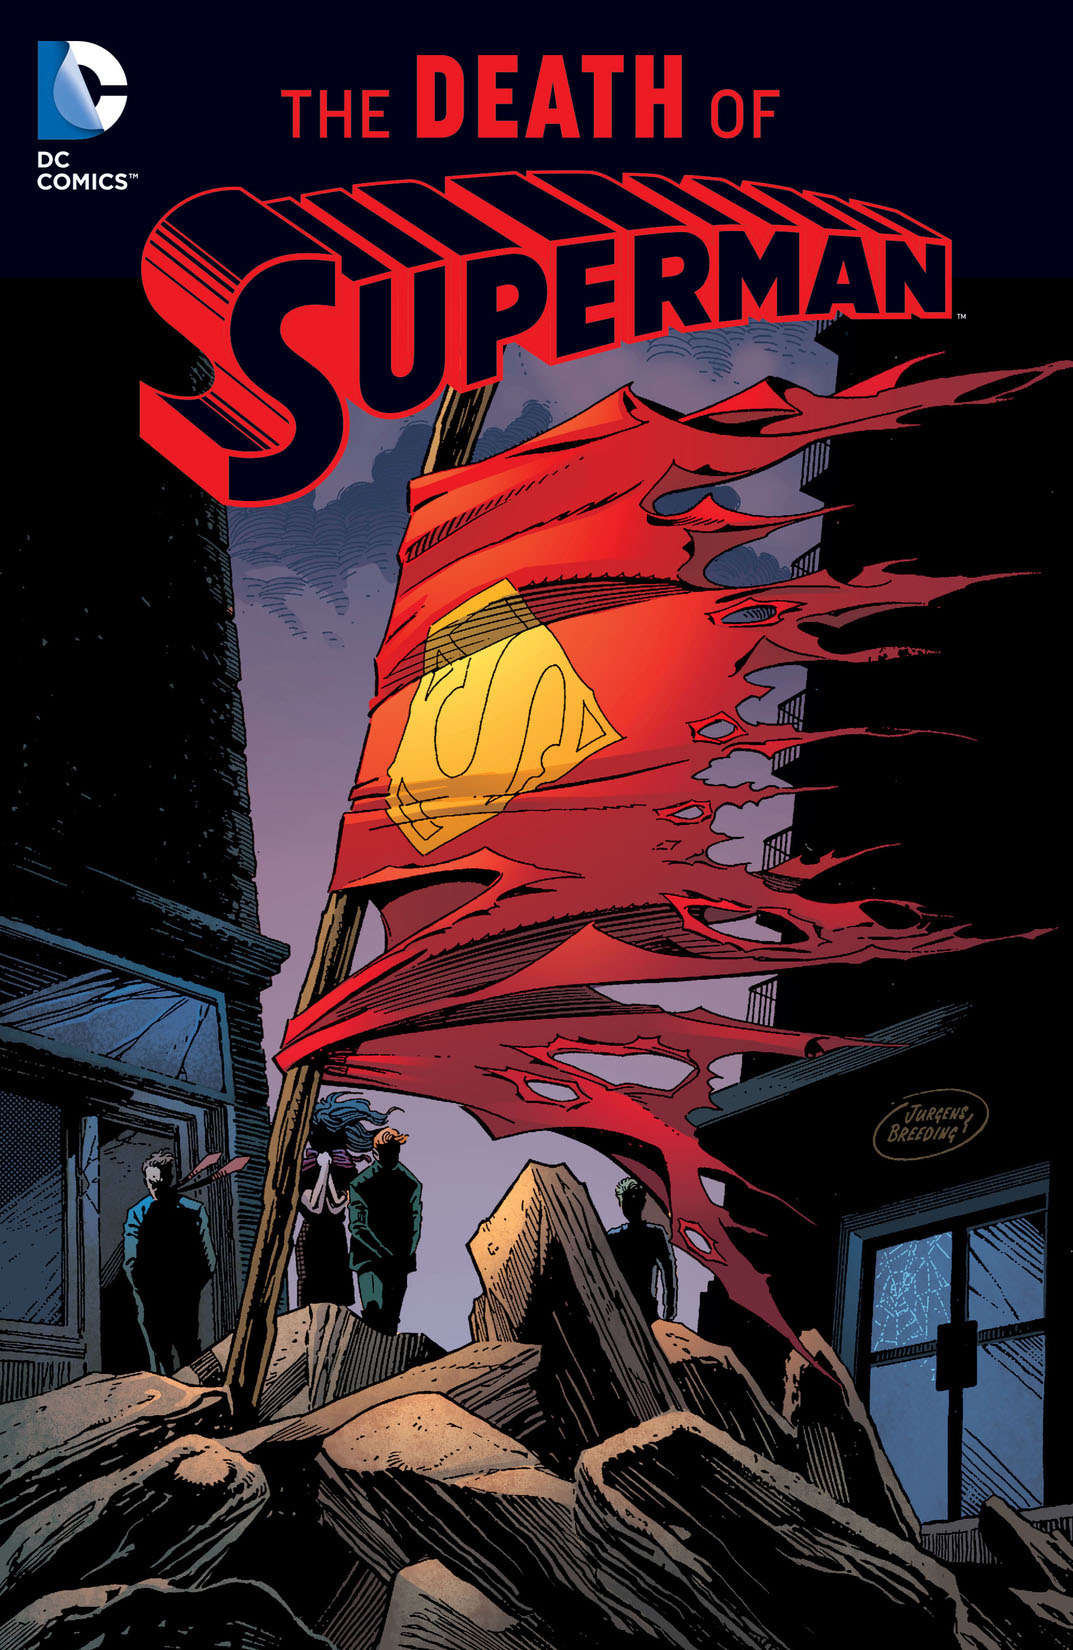 Superman: The Death of Superman (2016 Edition) preview images